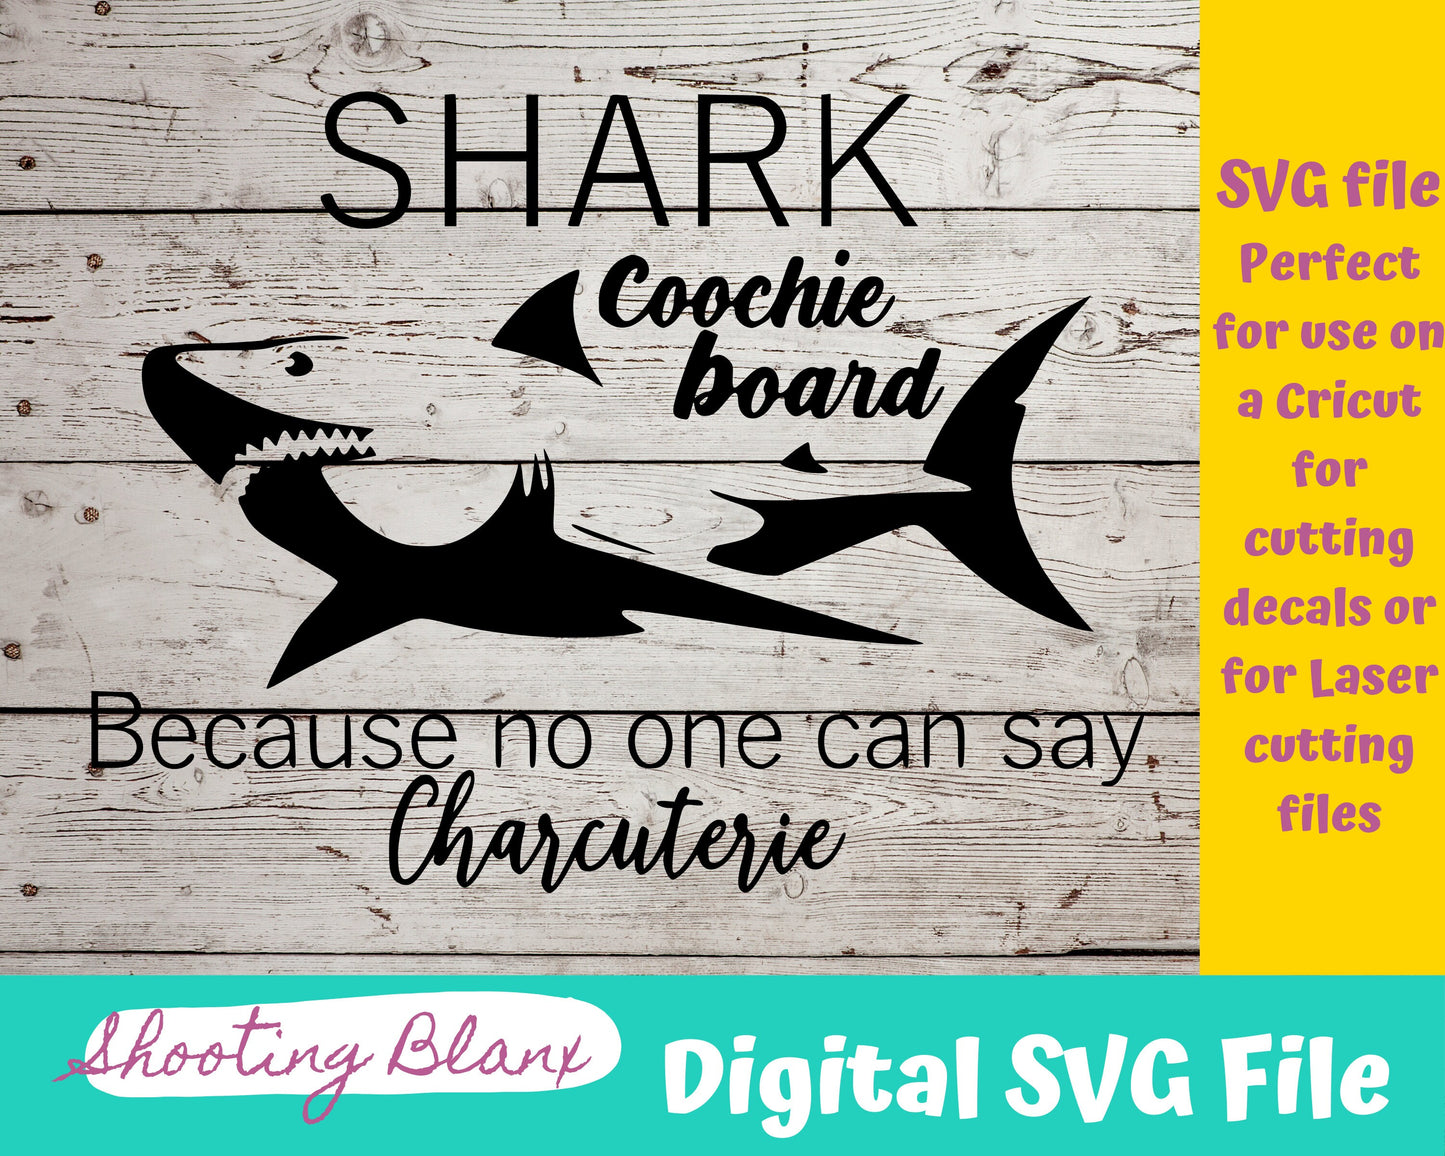 Charcuterie Board Funny SVG file perfect for Cricut, Cameo, or Silhouette also for laser engraving Glowforge, engrave, cutting board